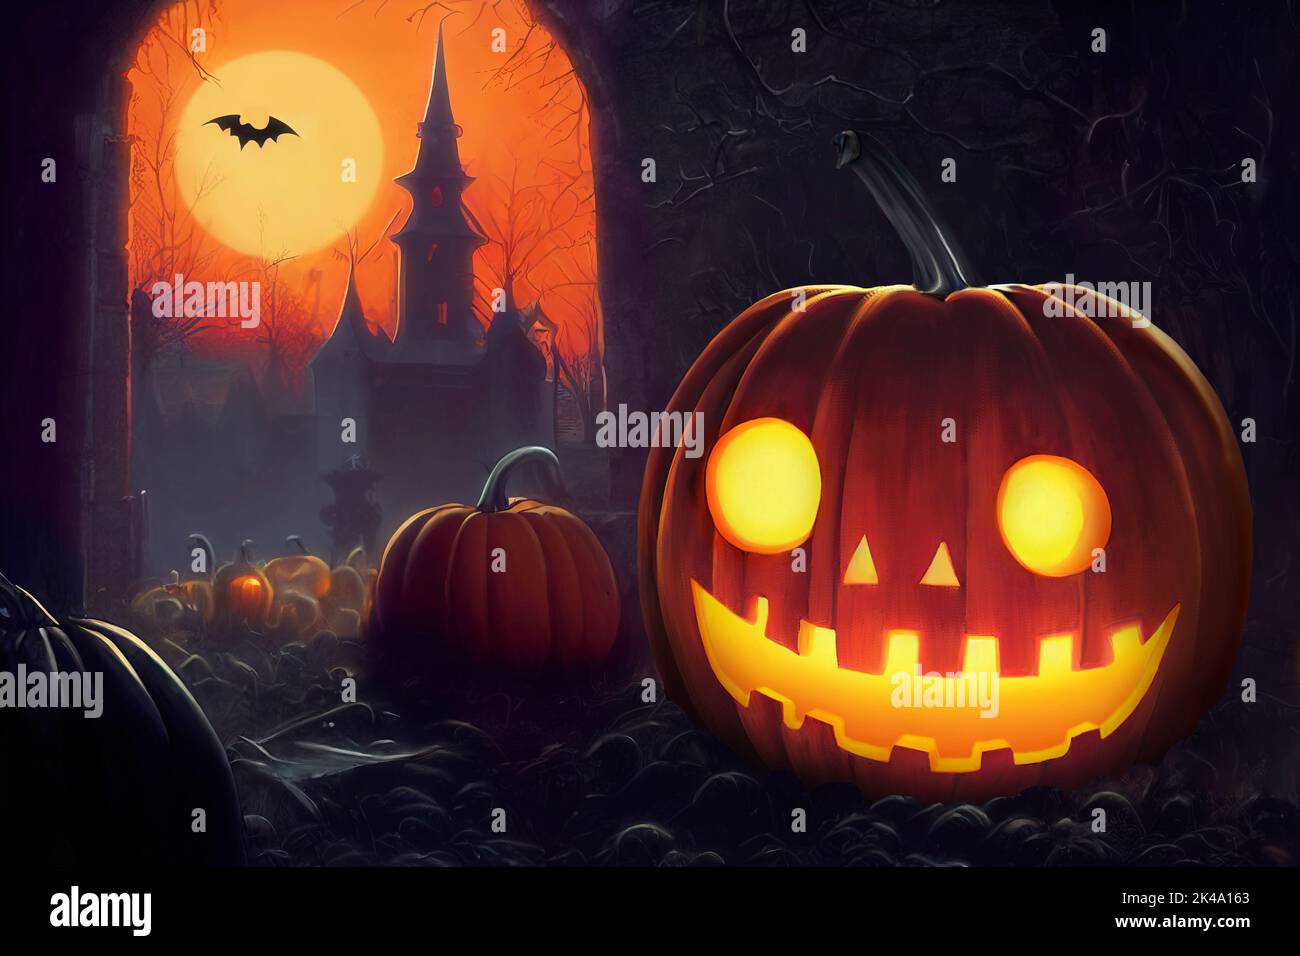 Halloween pumpkin with smiling spooky face against night landscape. Digital illustration Stock Photo